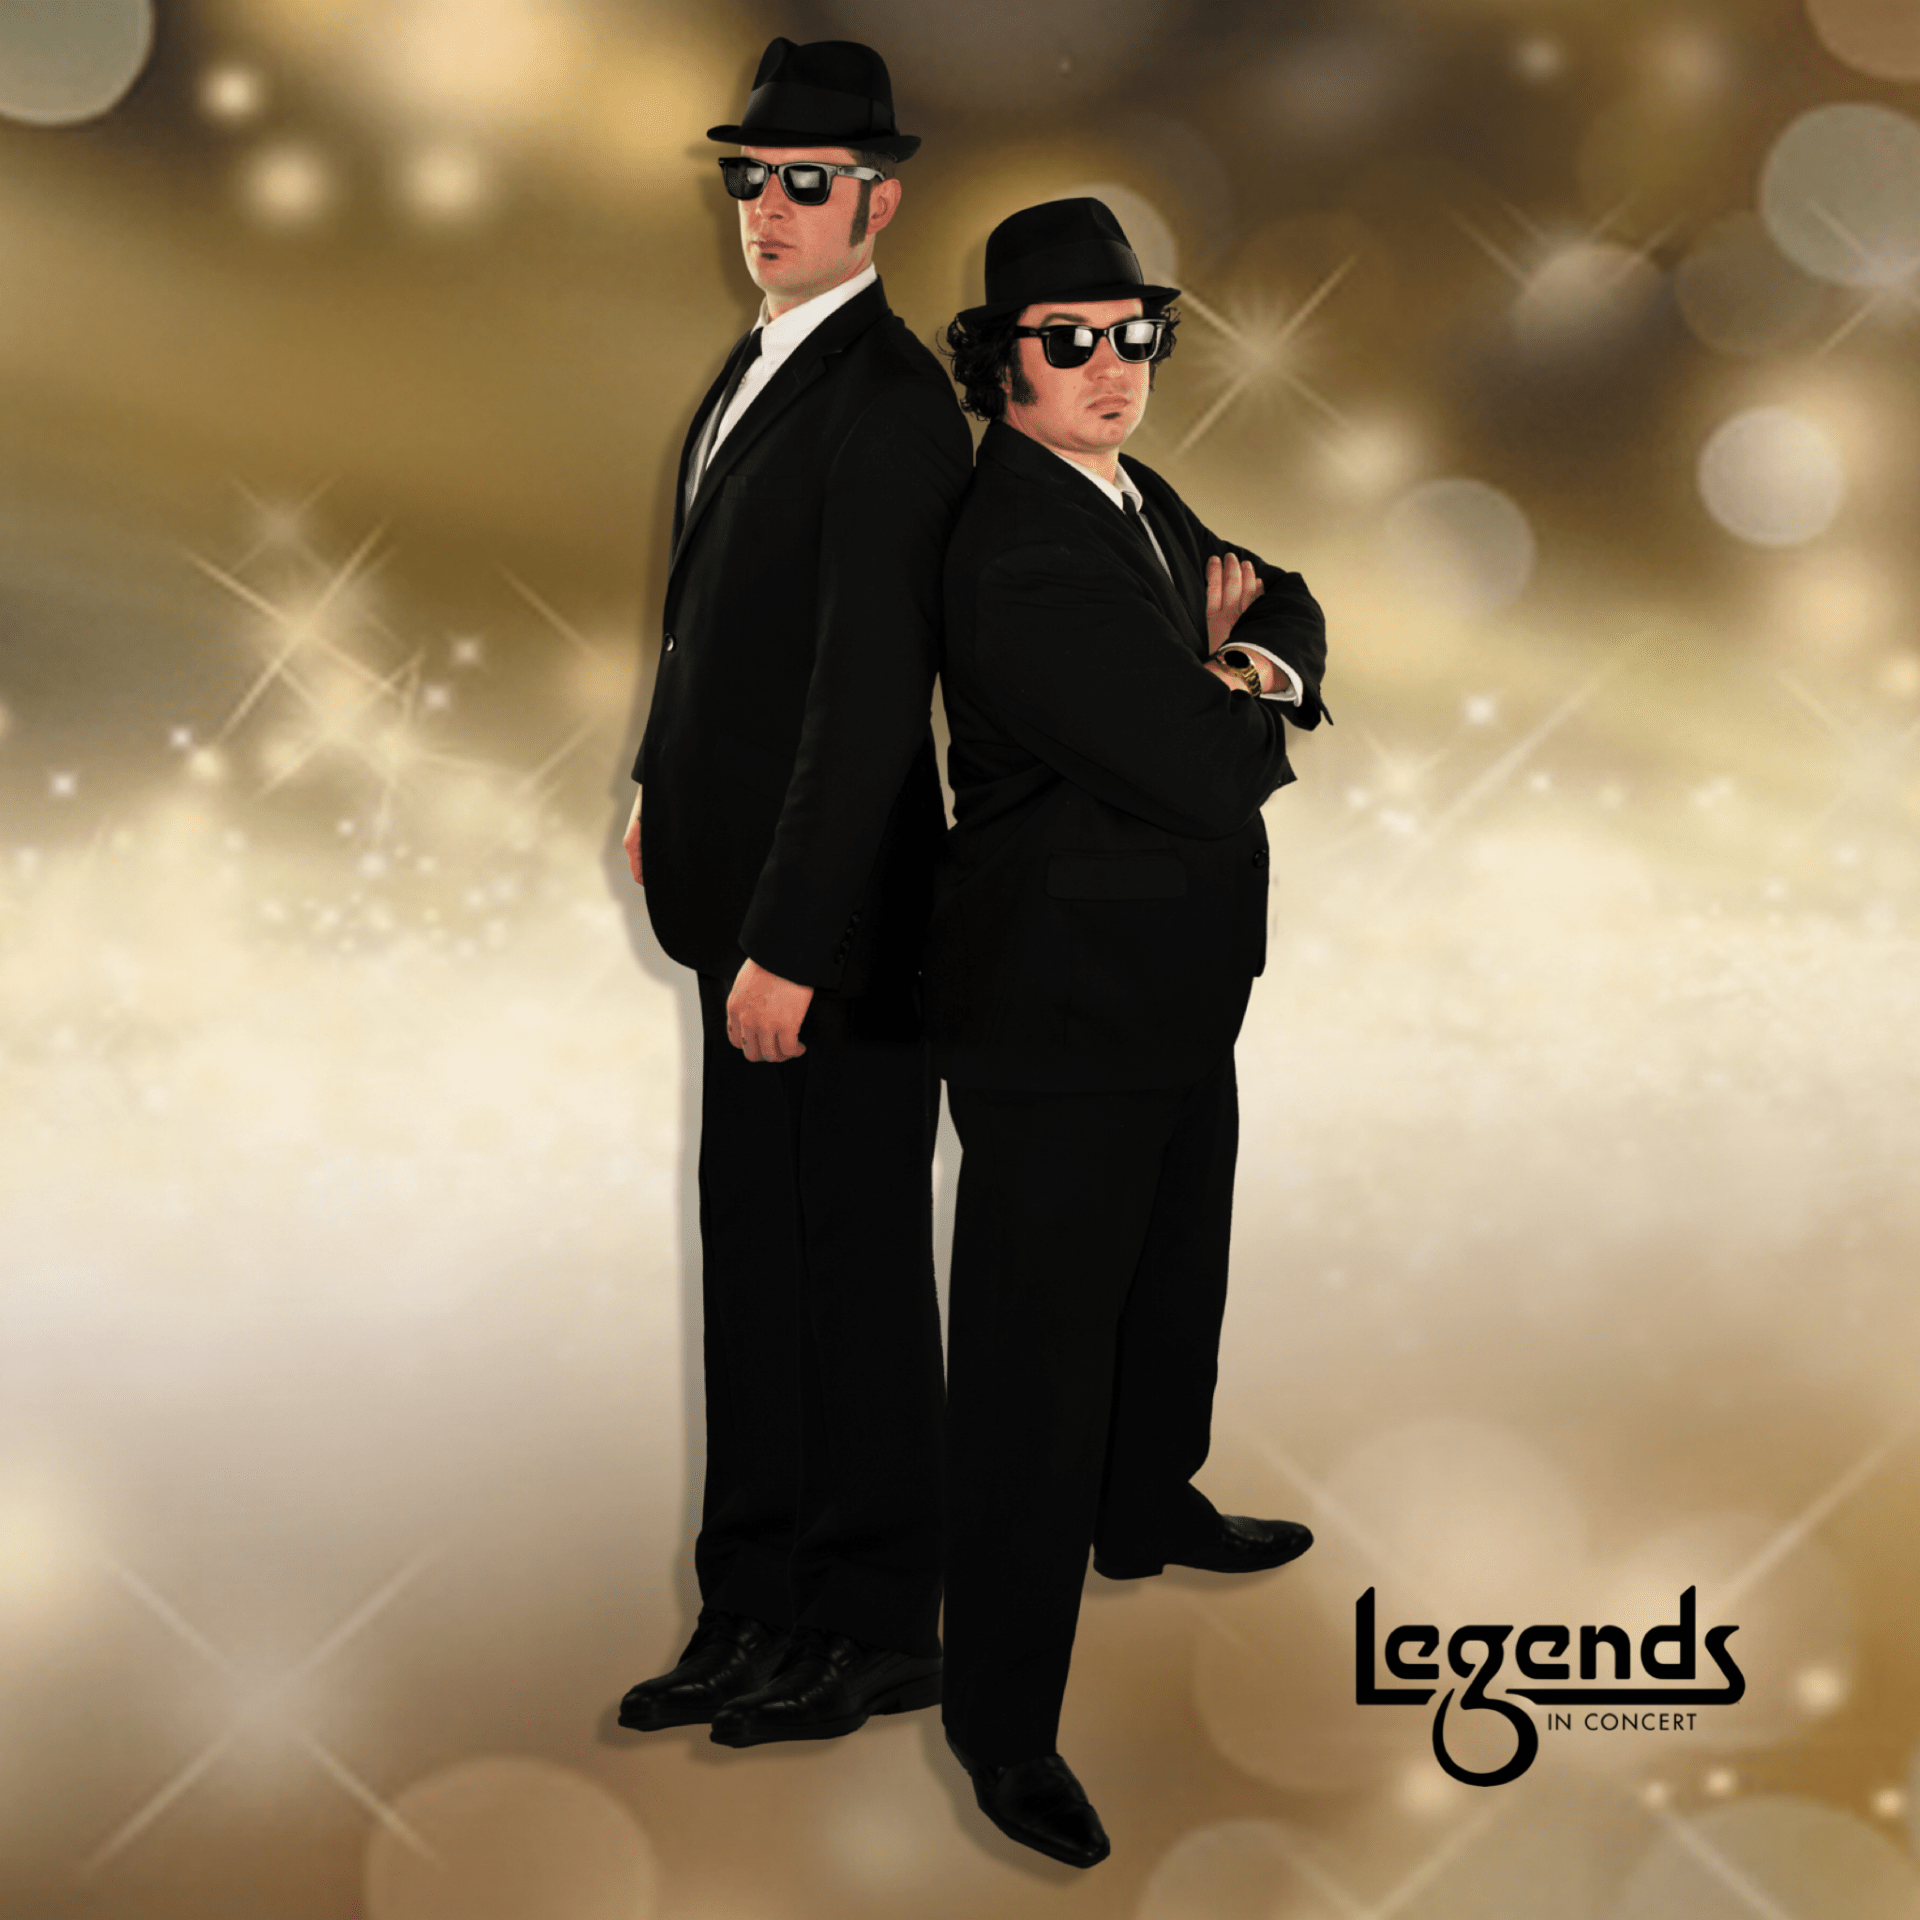 legends in concert the blues brothers™ justin sassanella clint nievar